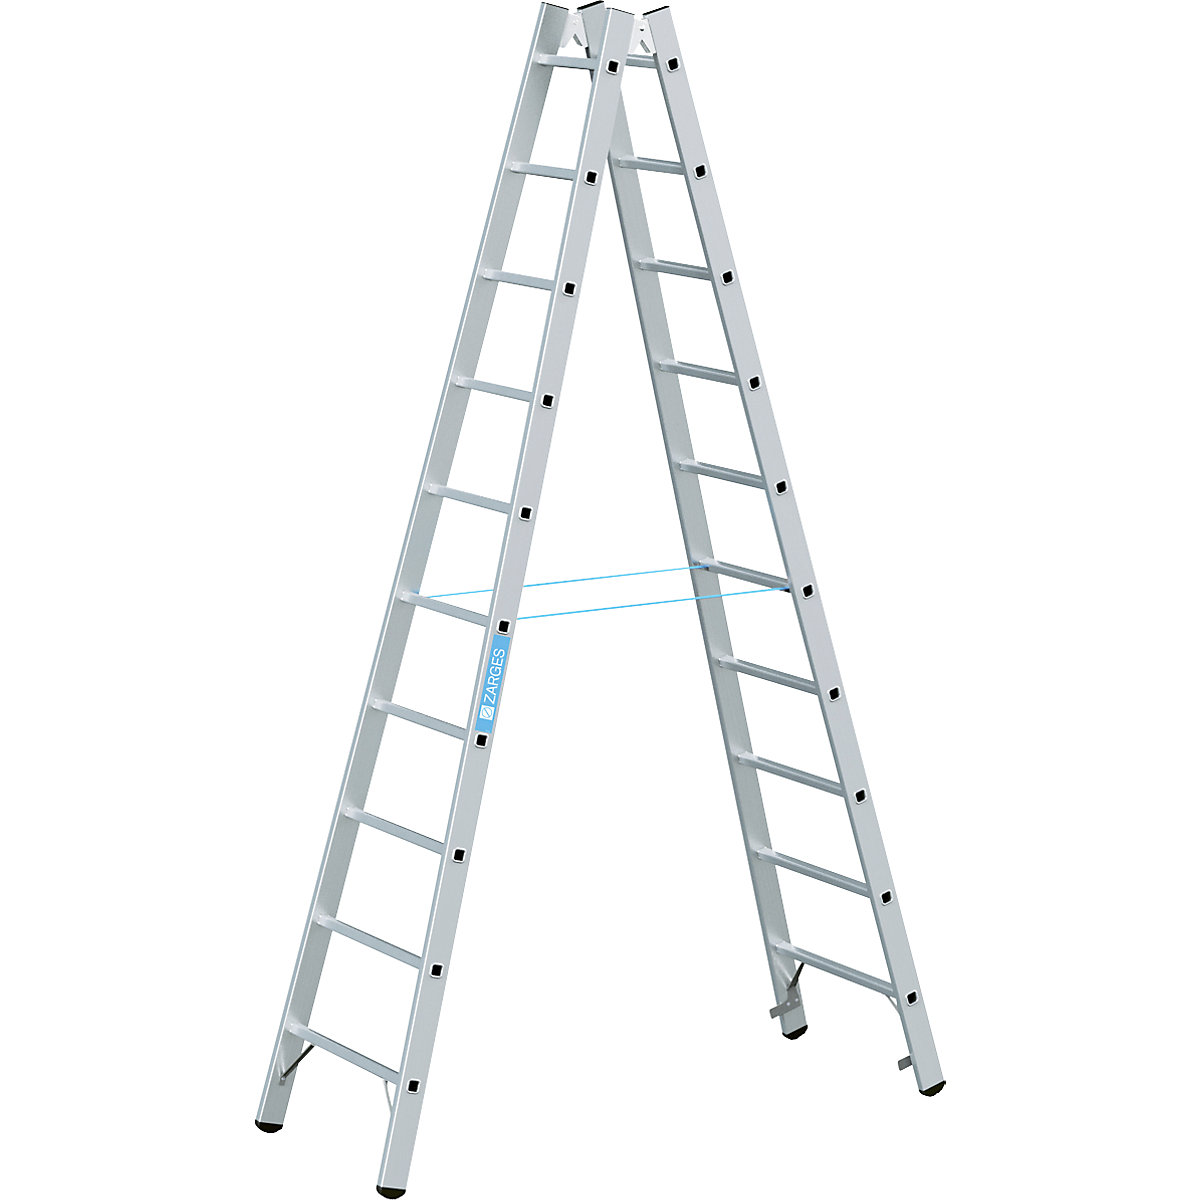 Professional rung ladder – ZARGES, double sided, 2 x 10 rungs-3